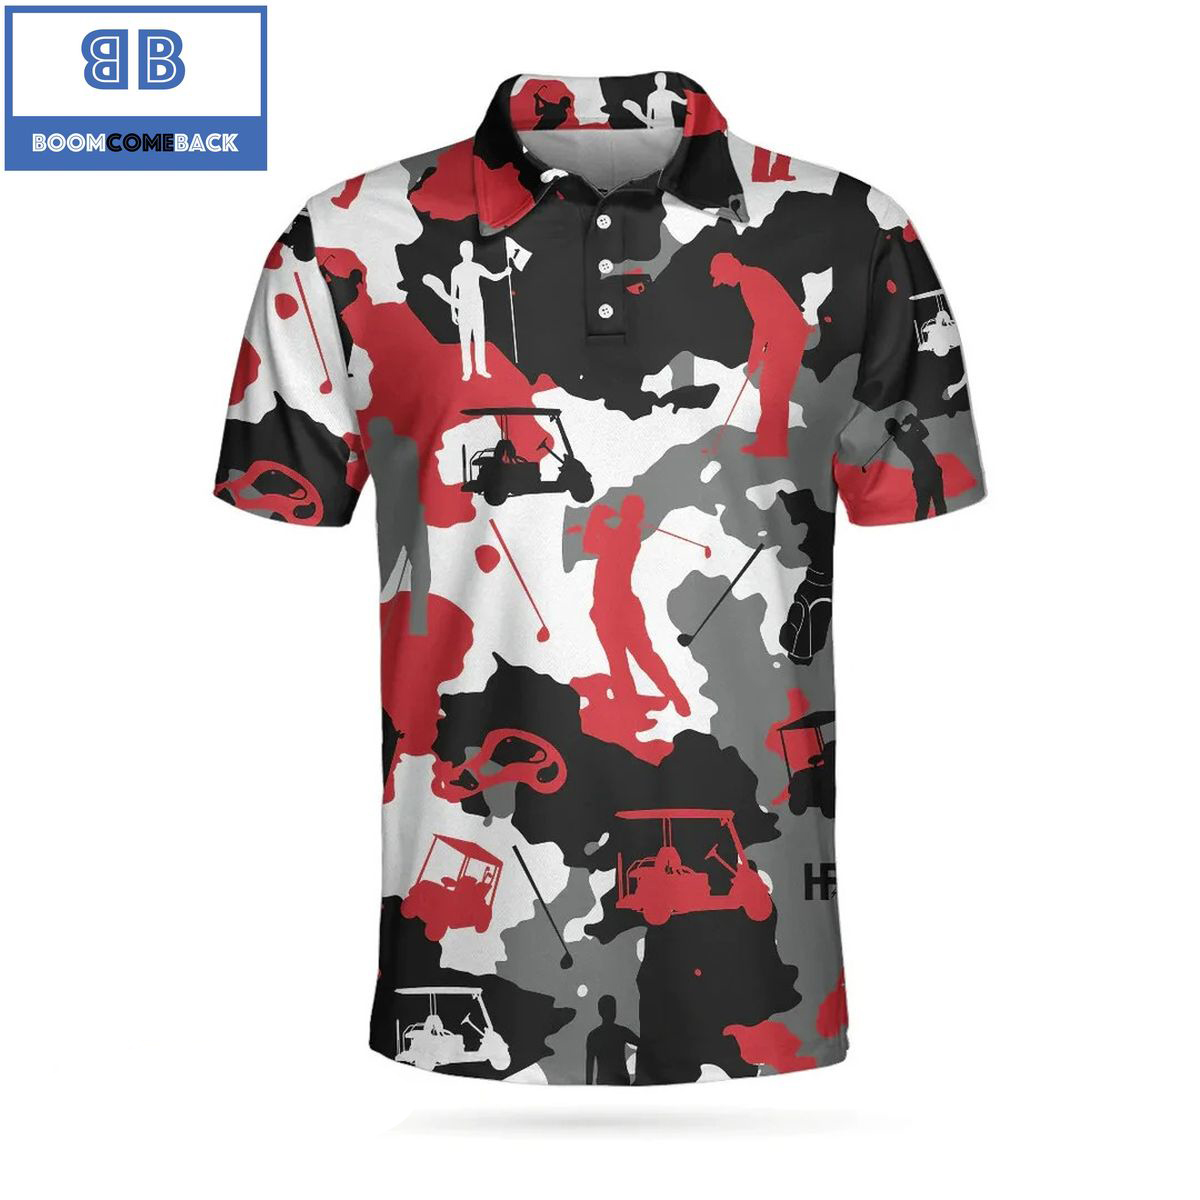 Red2BAnd2BWhite2BCamouflage2BGolf2BWith2BGolfer2BSilhouette2BAthletic2BCollared2BMens2BPolo2BShirt2B1 izZ83